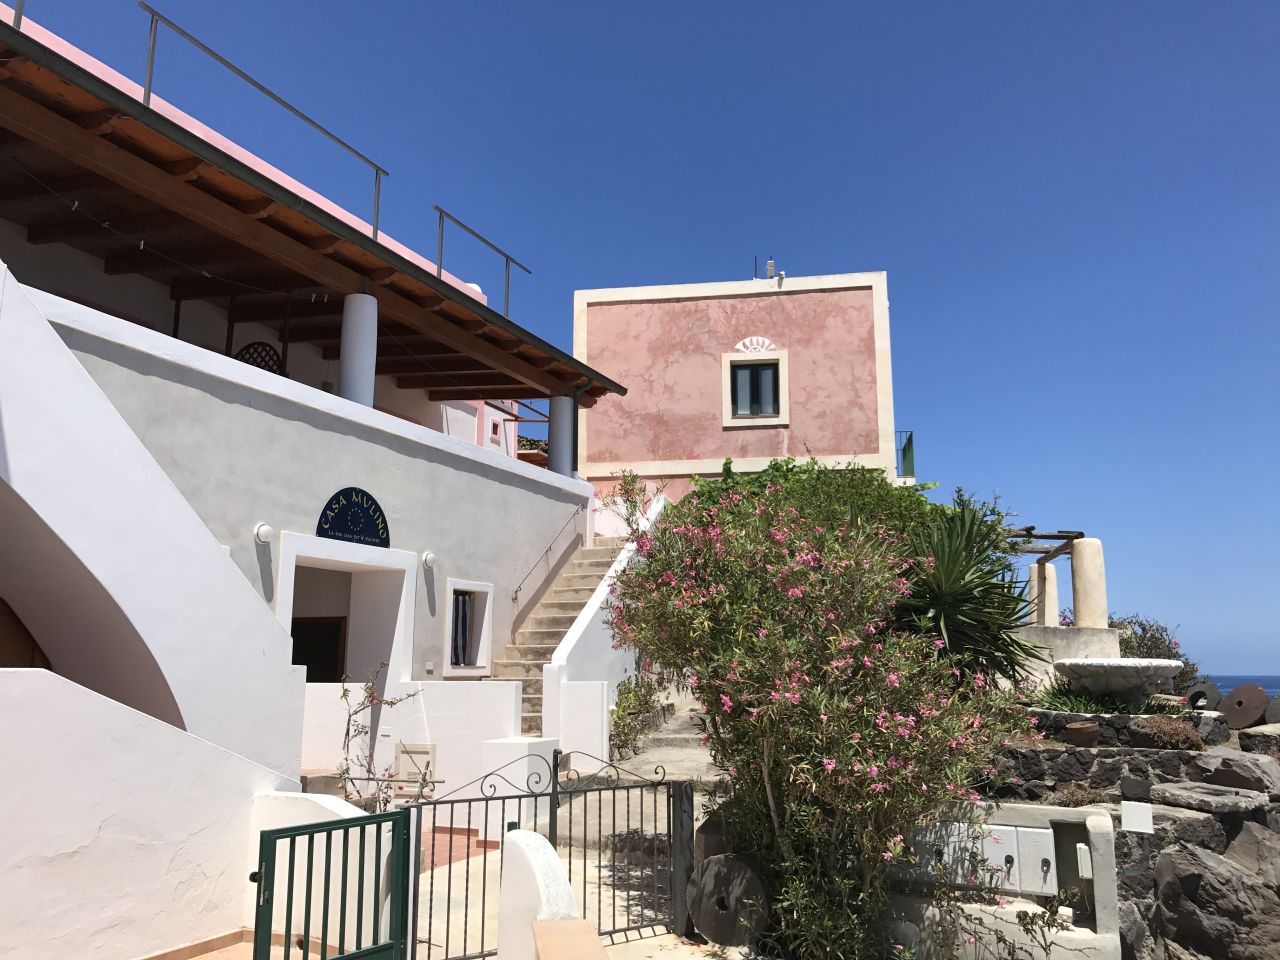 This pink villa, now a cozy hotel called <a href="http://www.alicudicasamulino.it/index.php" target="_blank" target="_blank">Casa Mulino</a>, was once the village mill where oblivious women prepared hallucinogenic bread to feed to unsuspecting husbands and children.